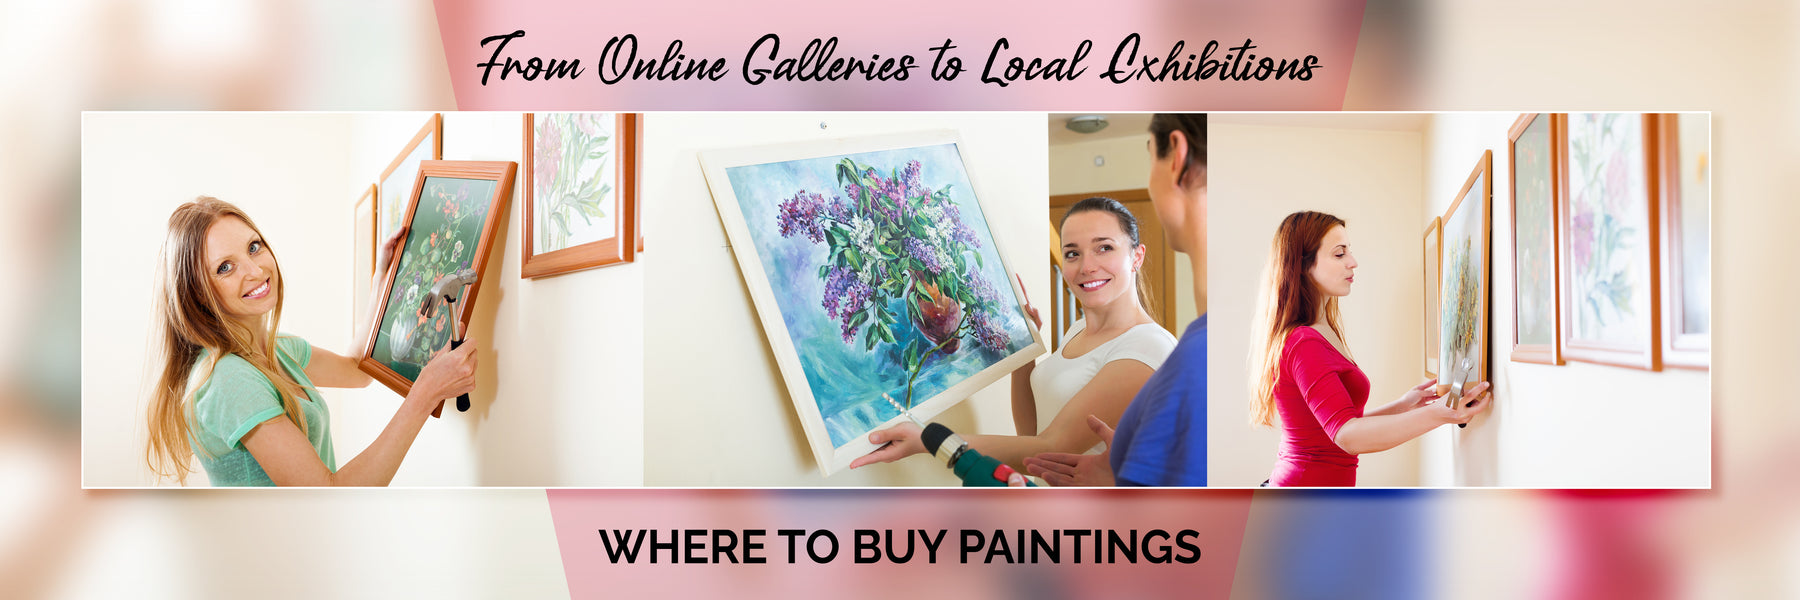 From Online Galleries to Local Exhibitions: Where to Buy Paintings